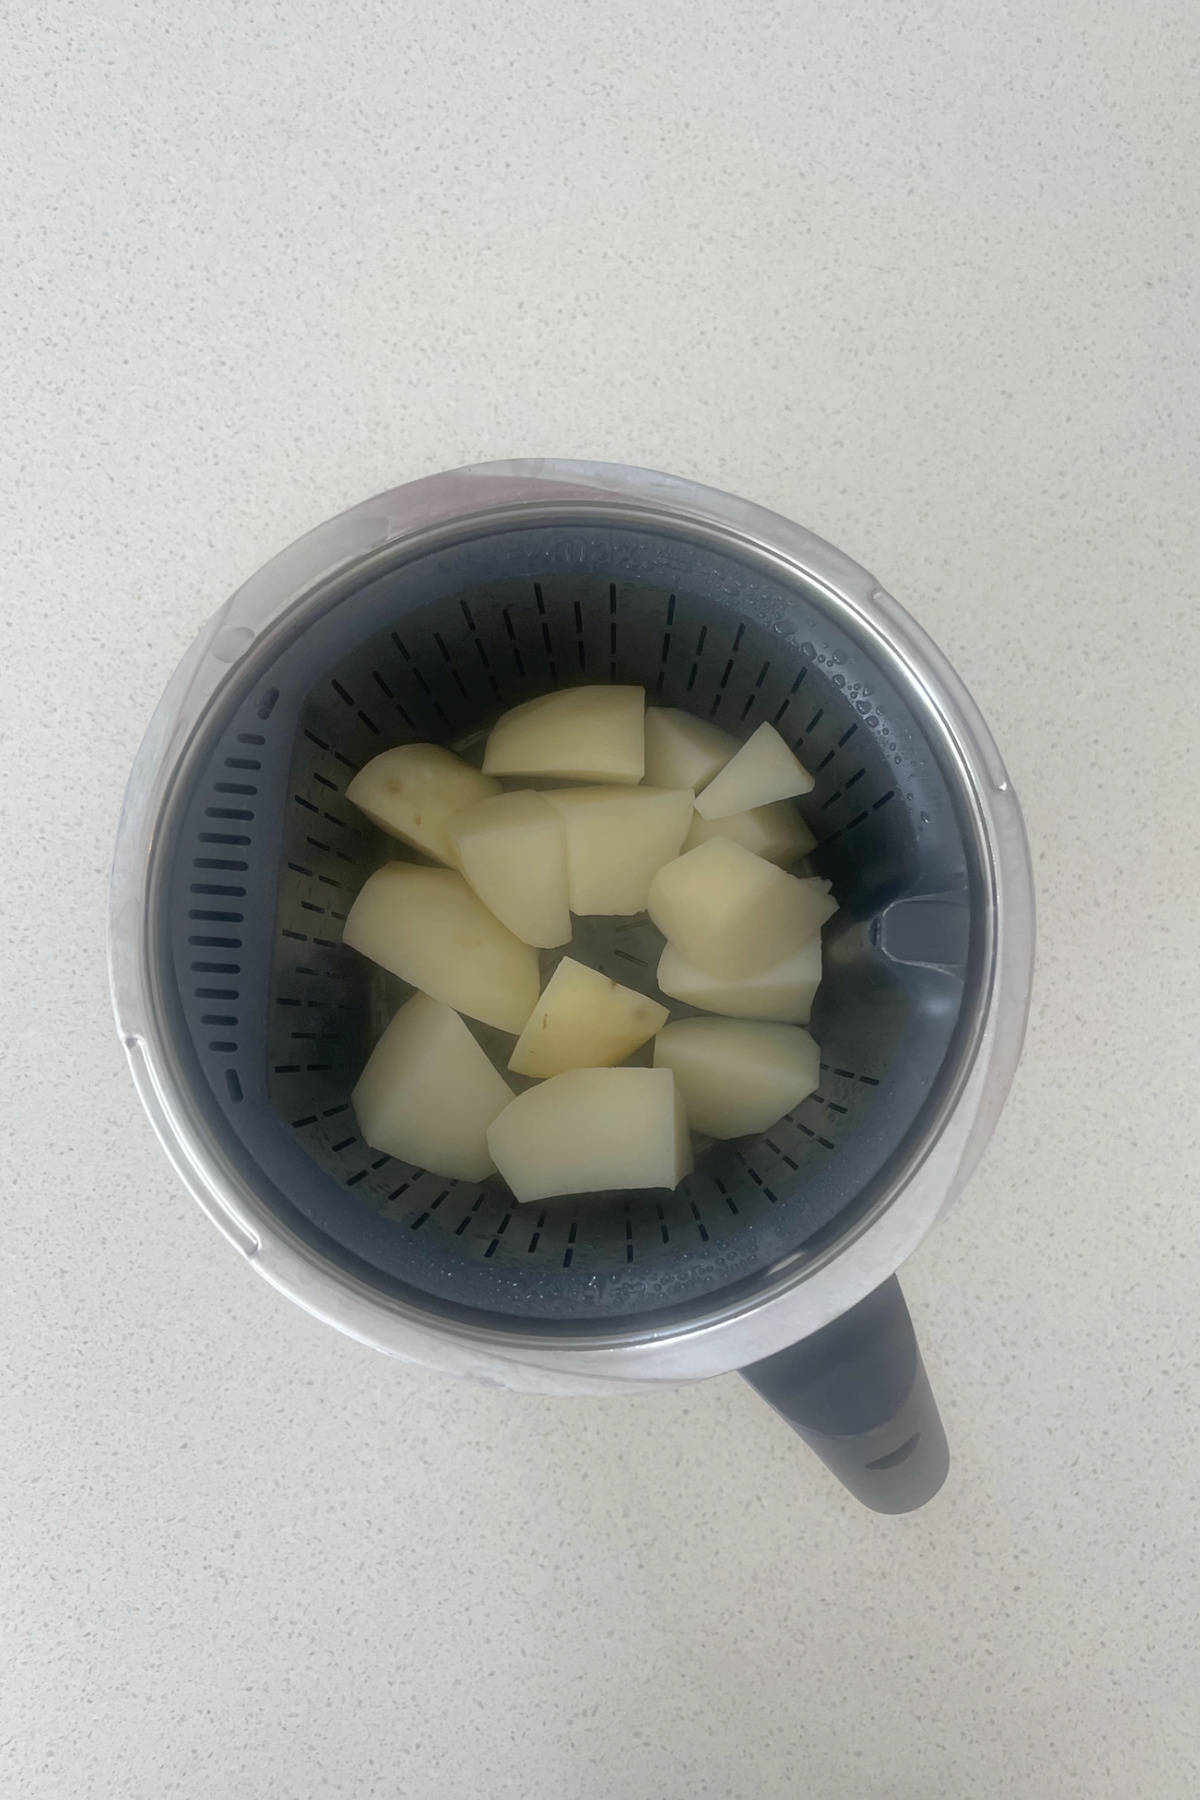 Boiled potatoes inside a thermomix bowl.